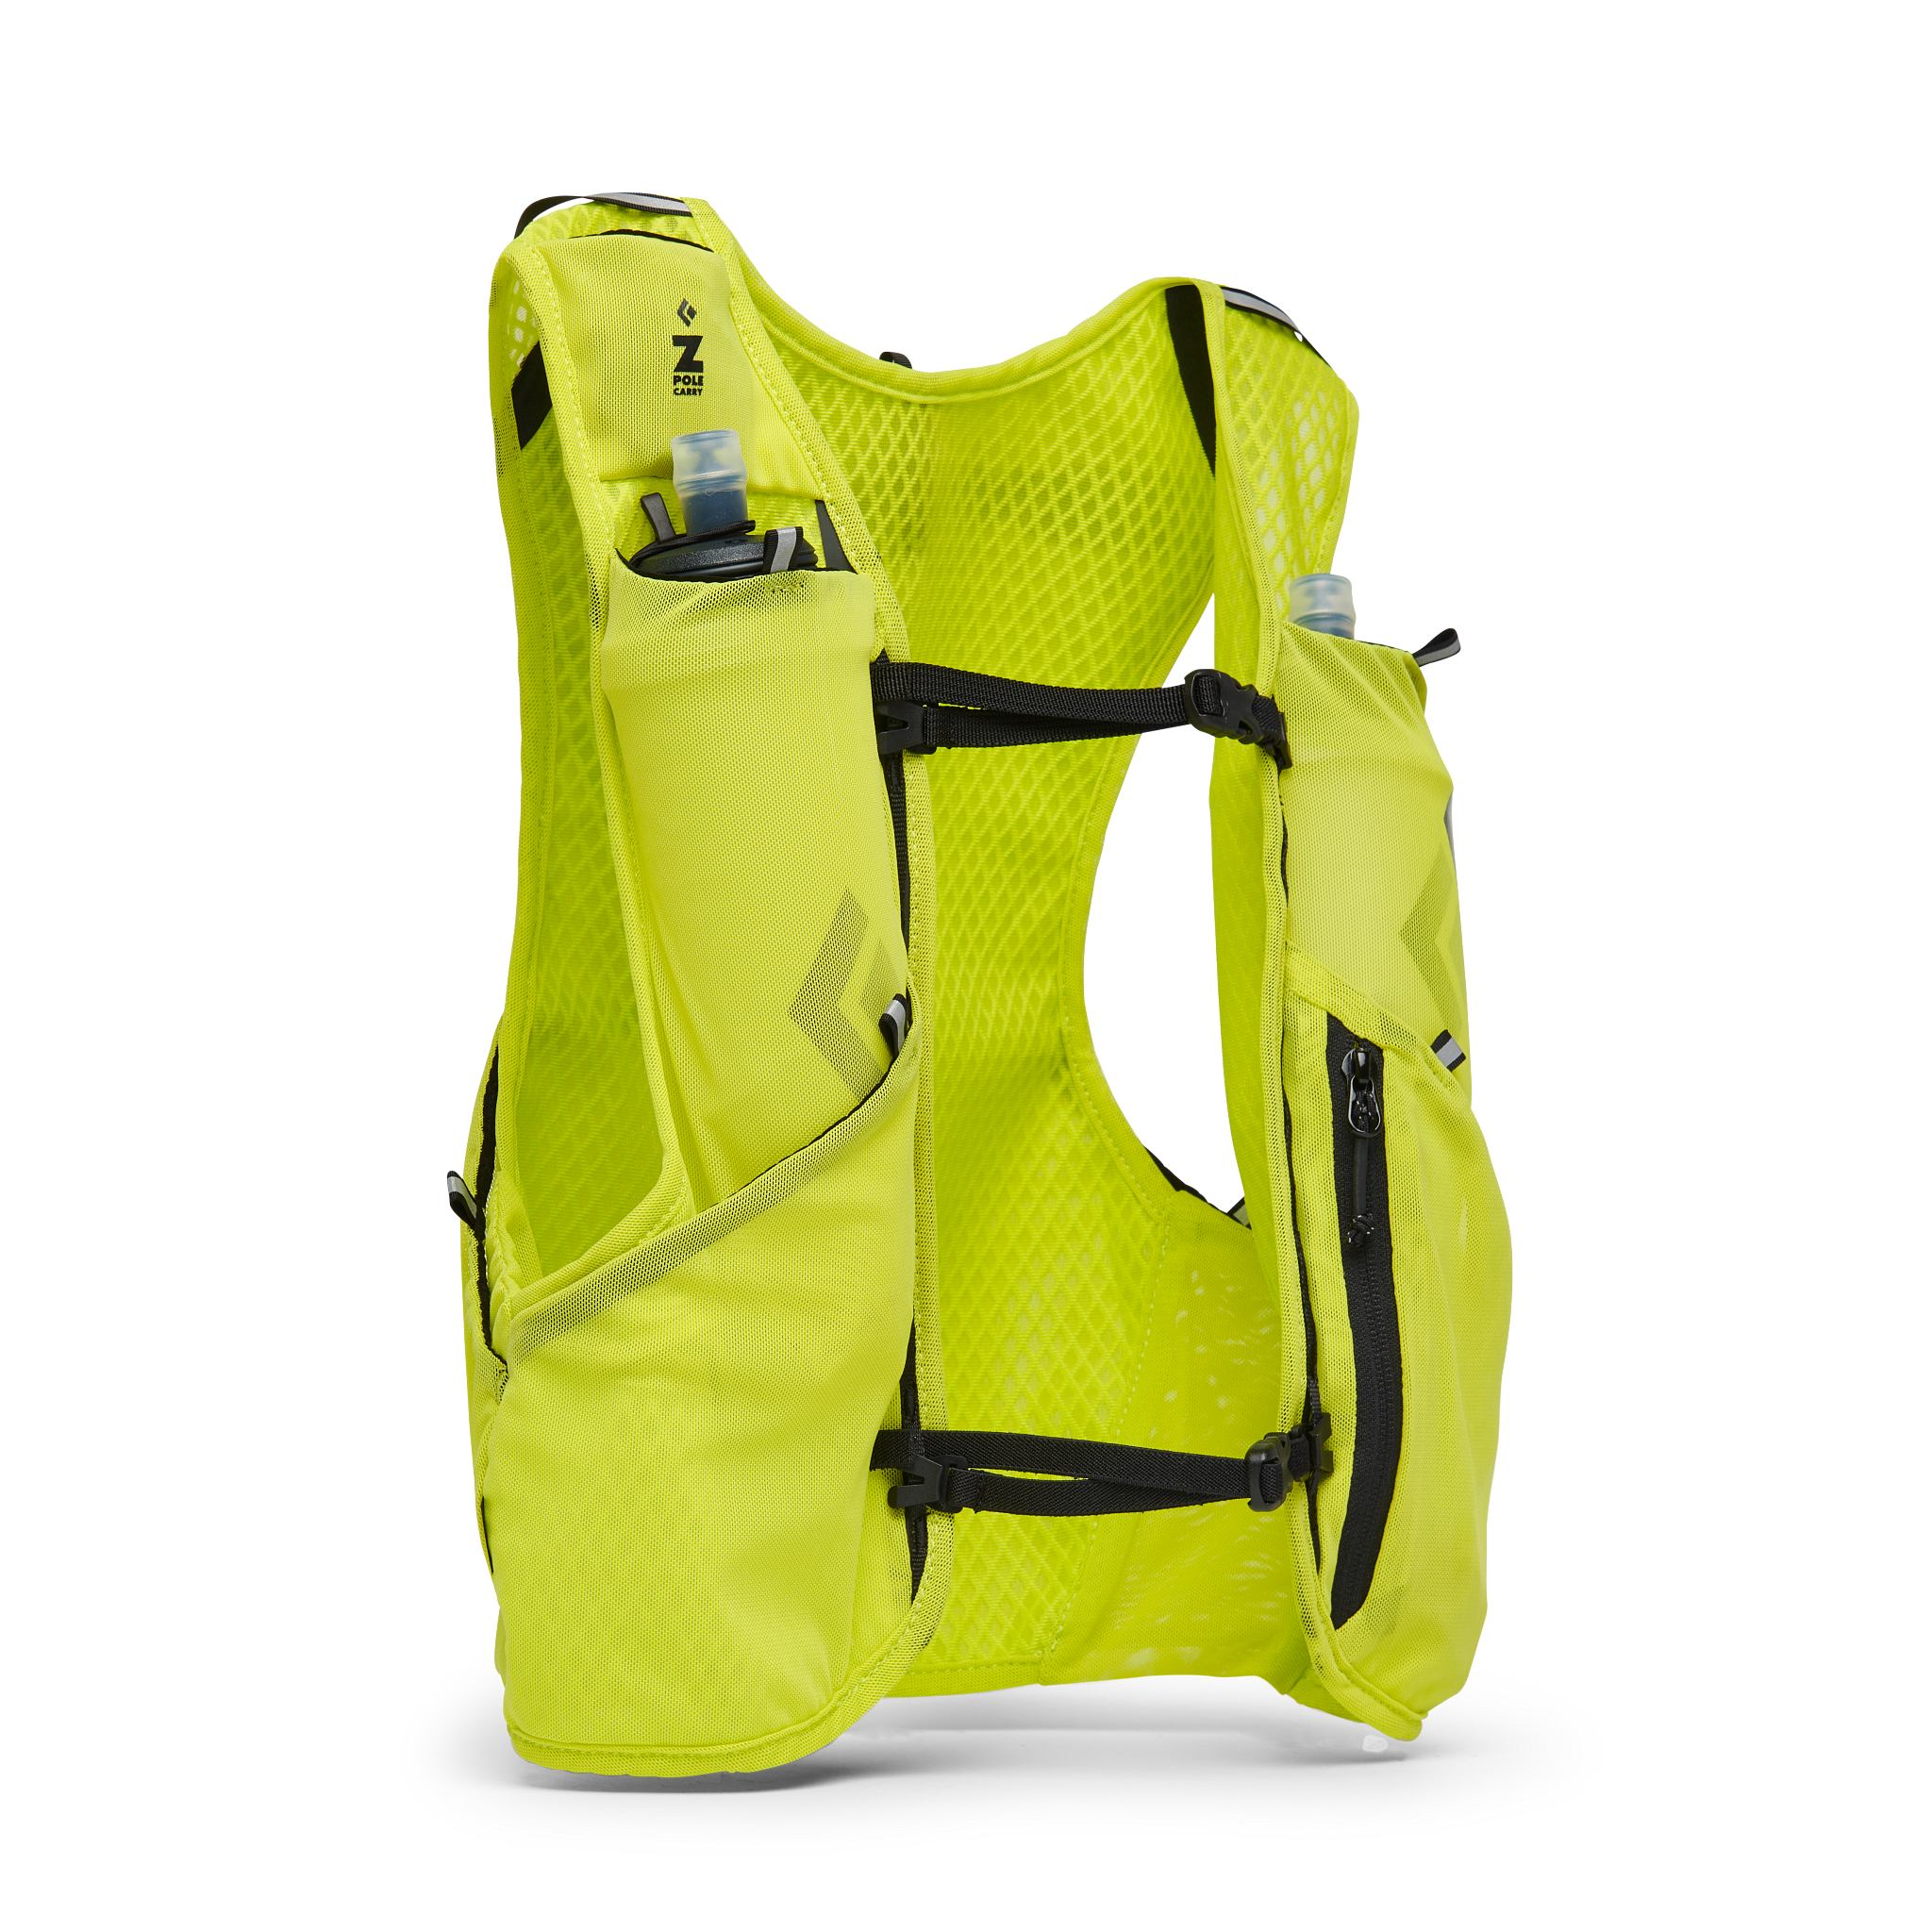 Black Diamond Equipment Distance 4 Hydration Vest Backpack, Large Optical Yellow